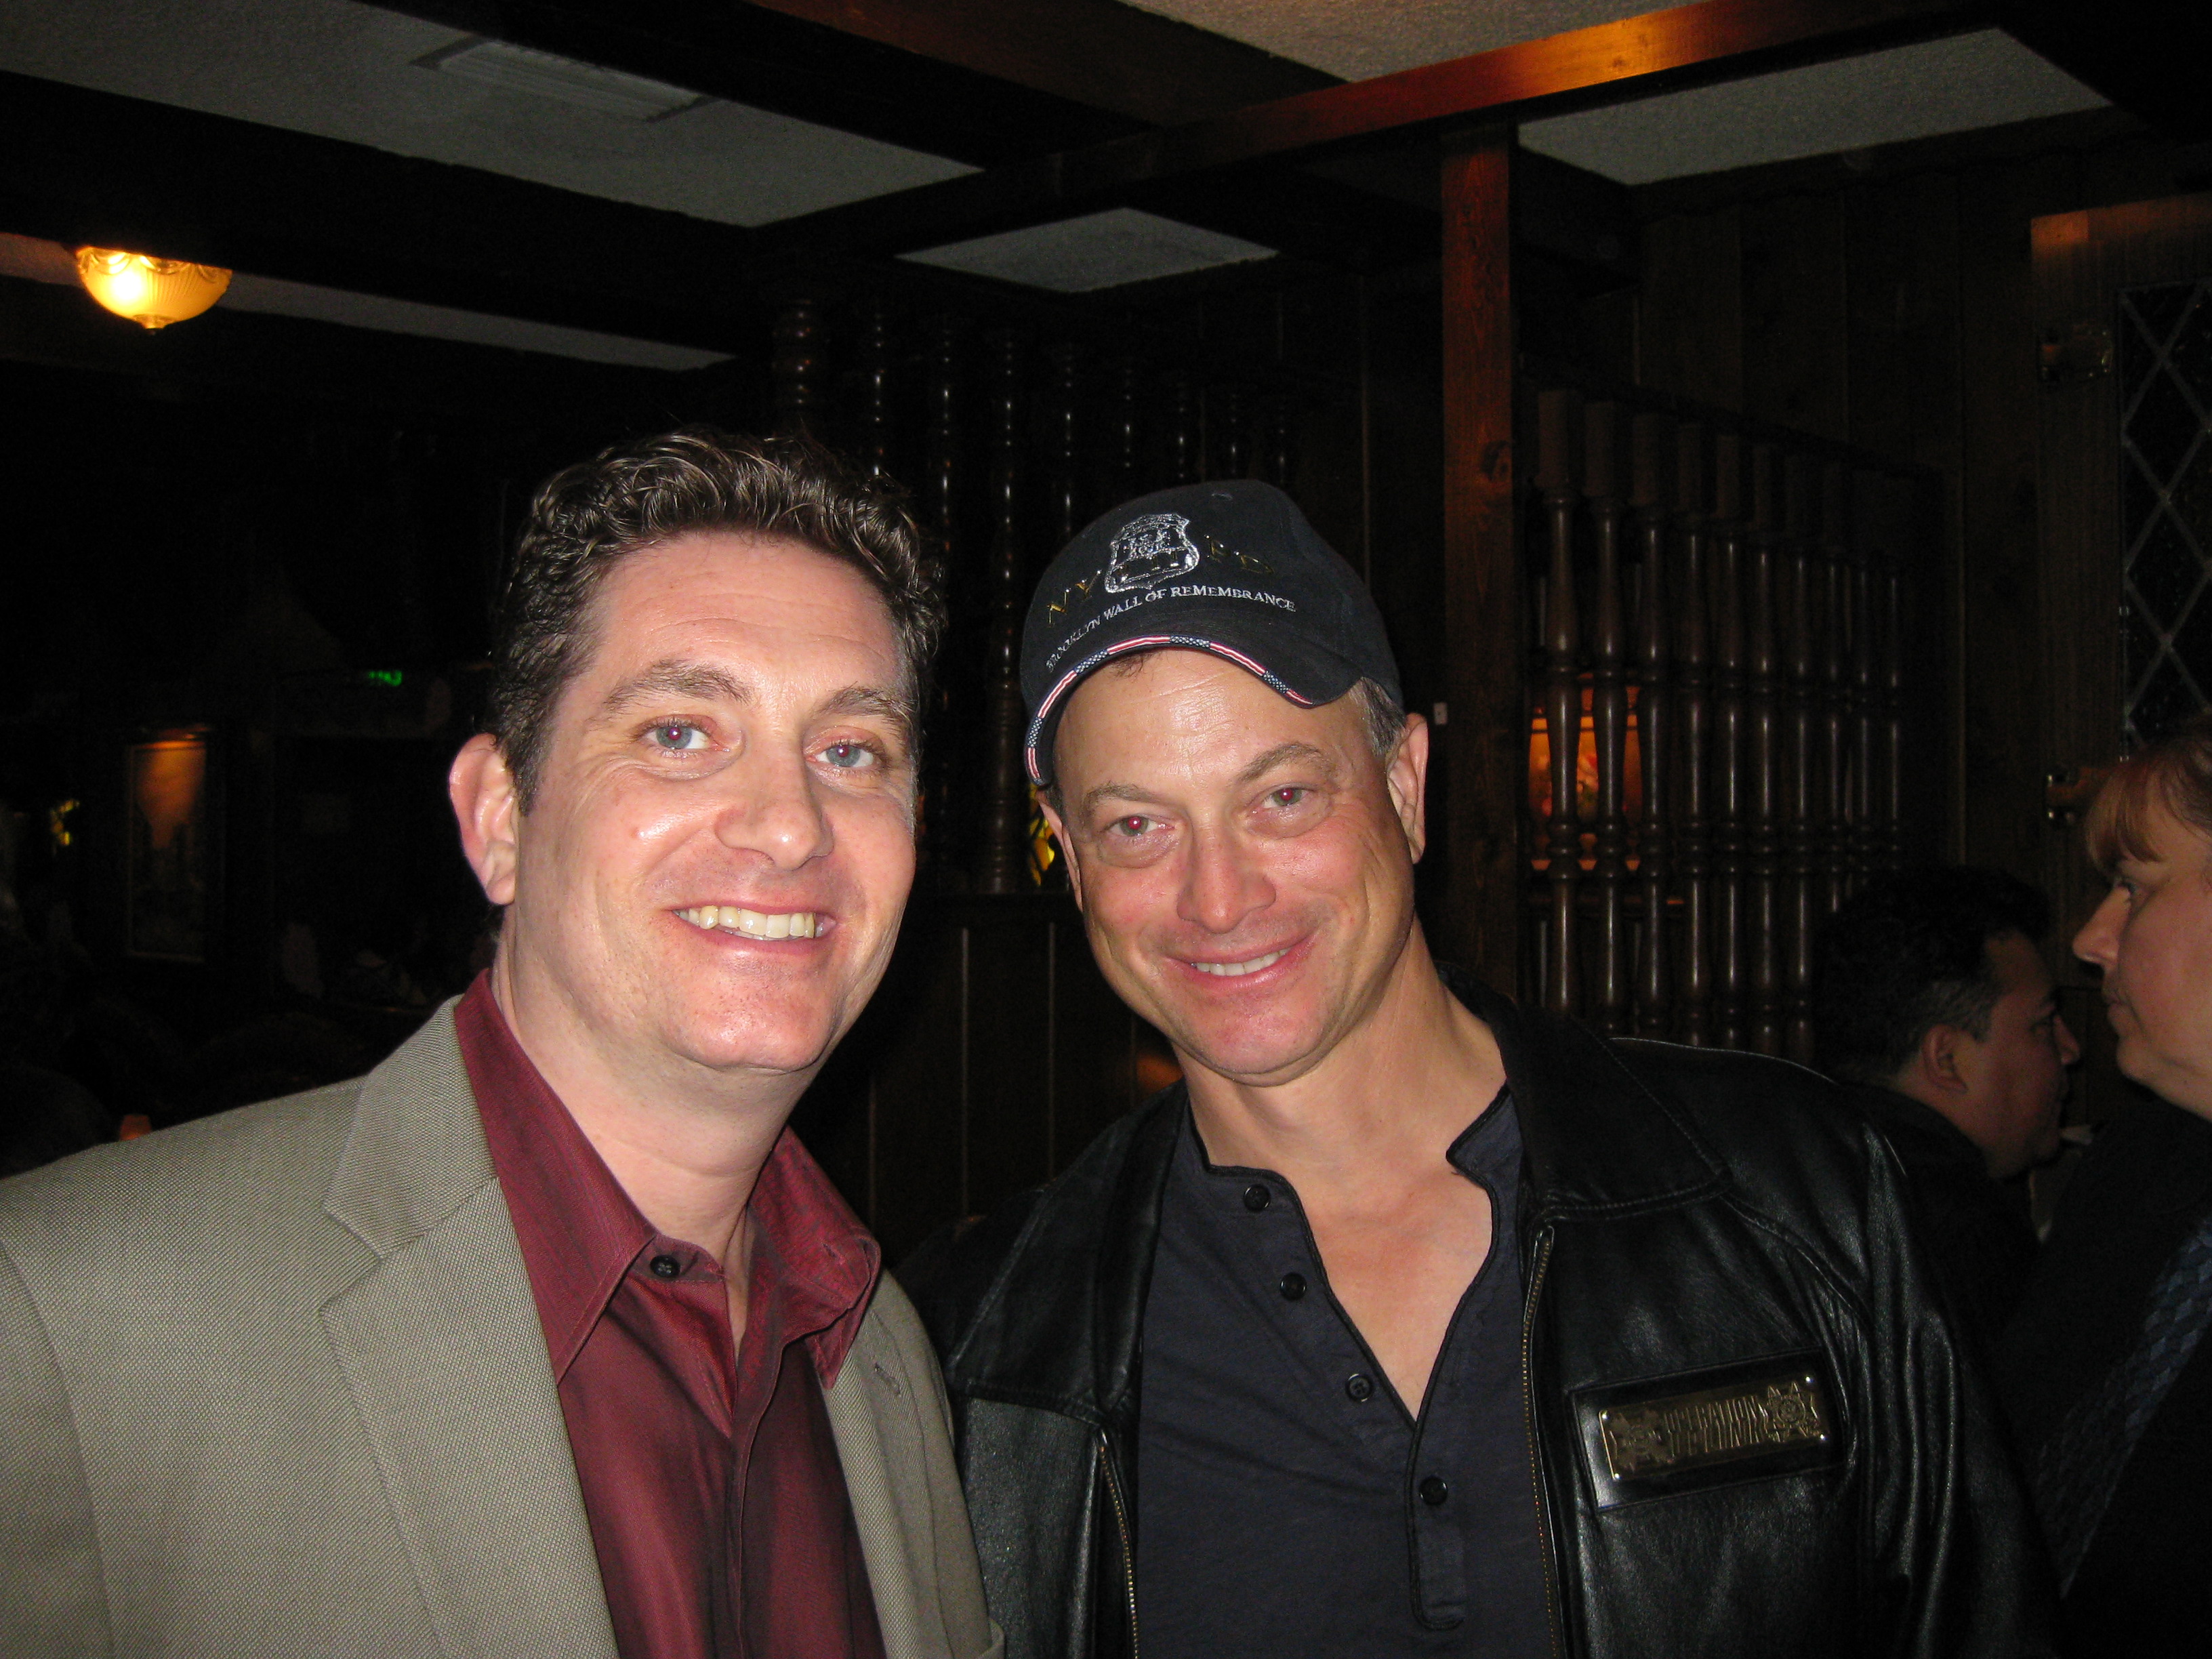 CSI:Ny star Gary Sinise and actor Michael Christaldi at an event at Brioni's restaurant in Los Angeles.